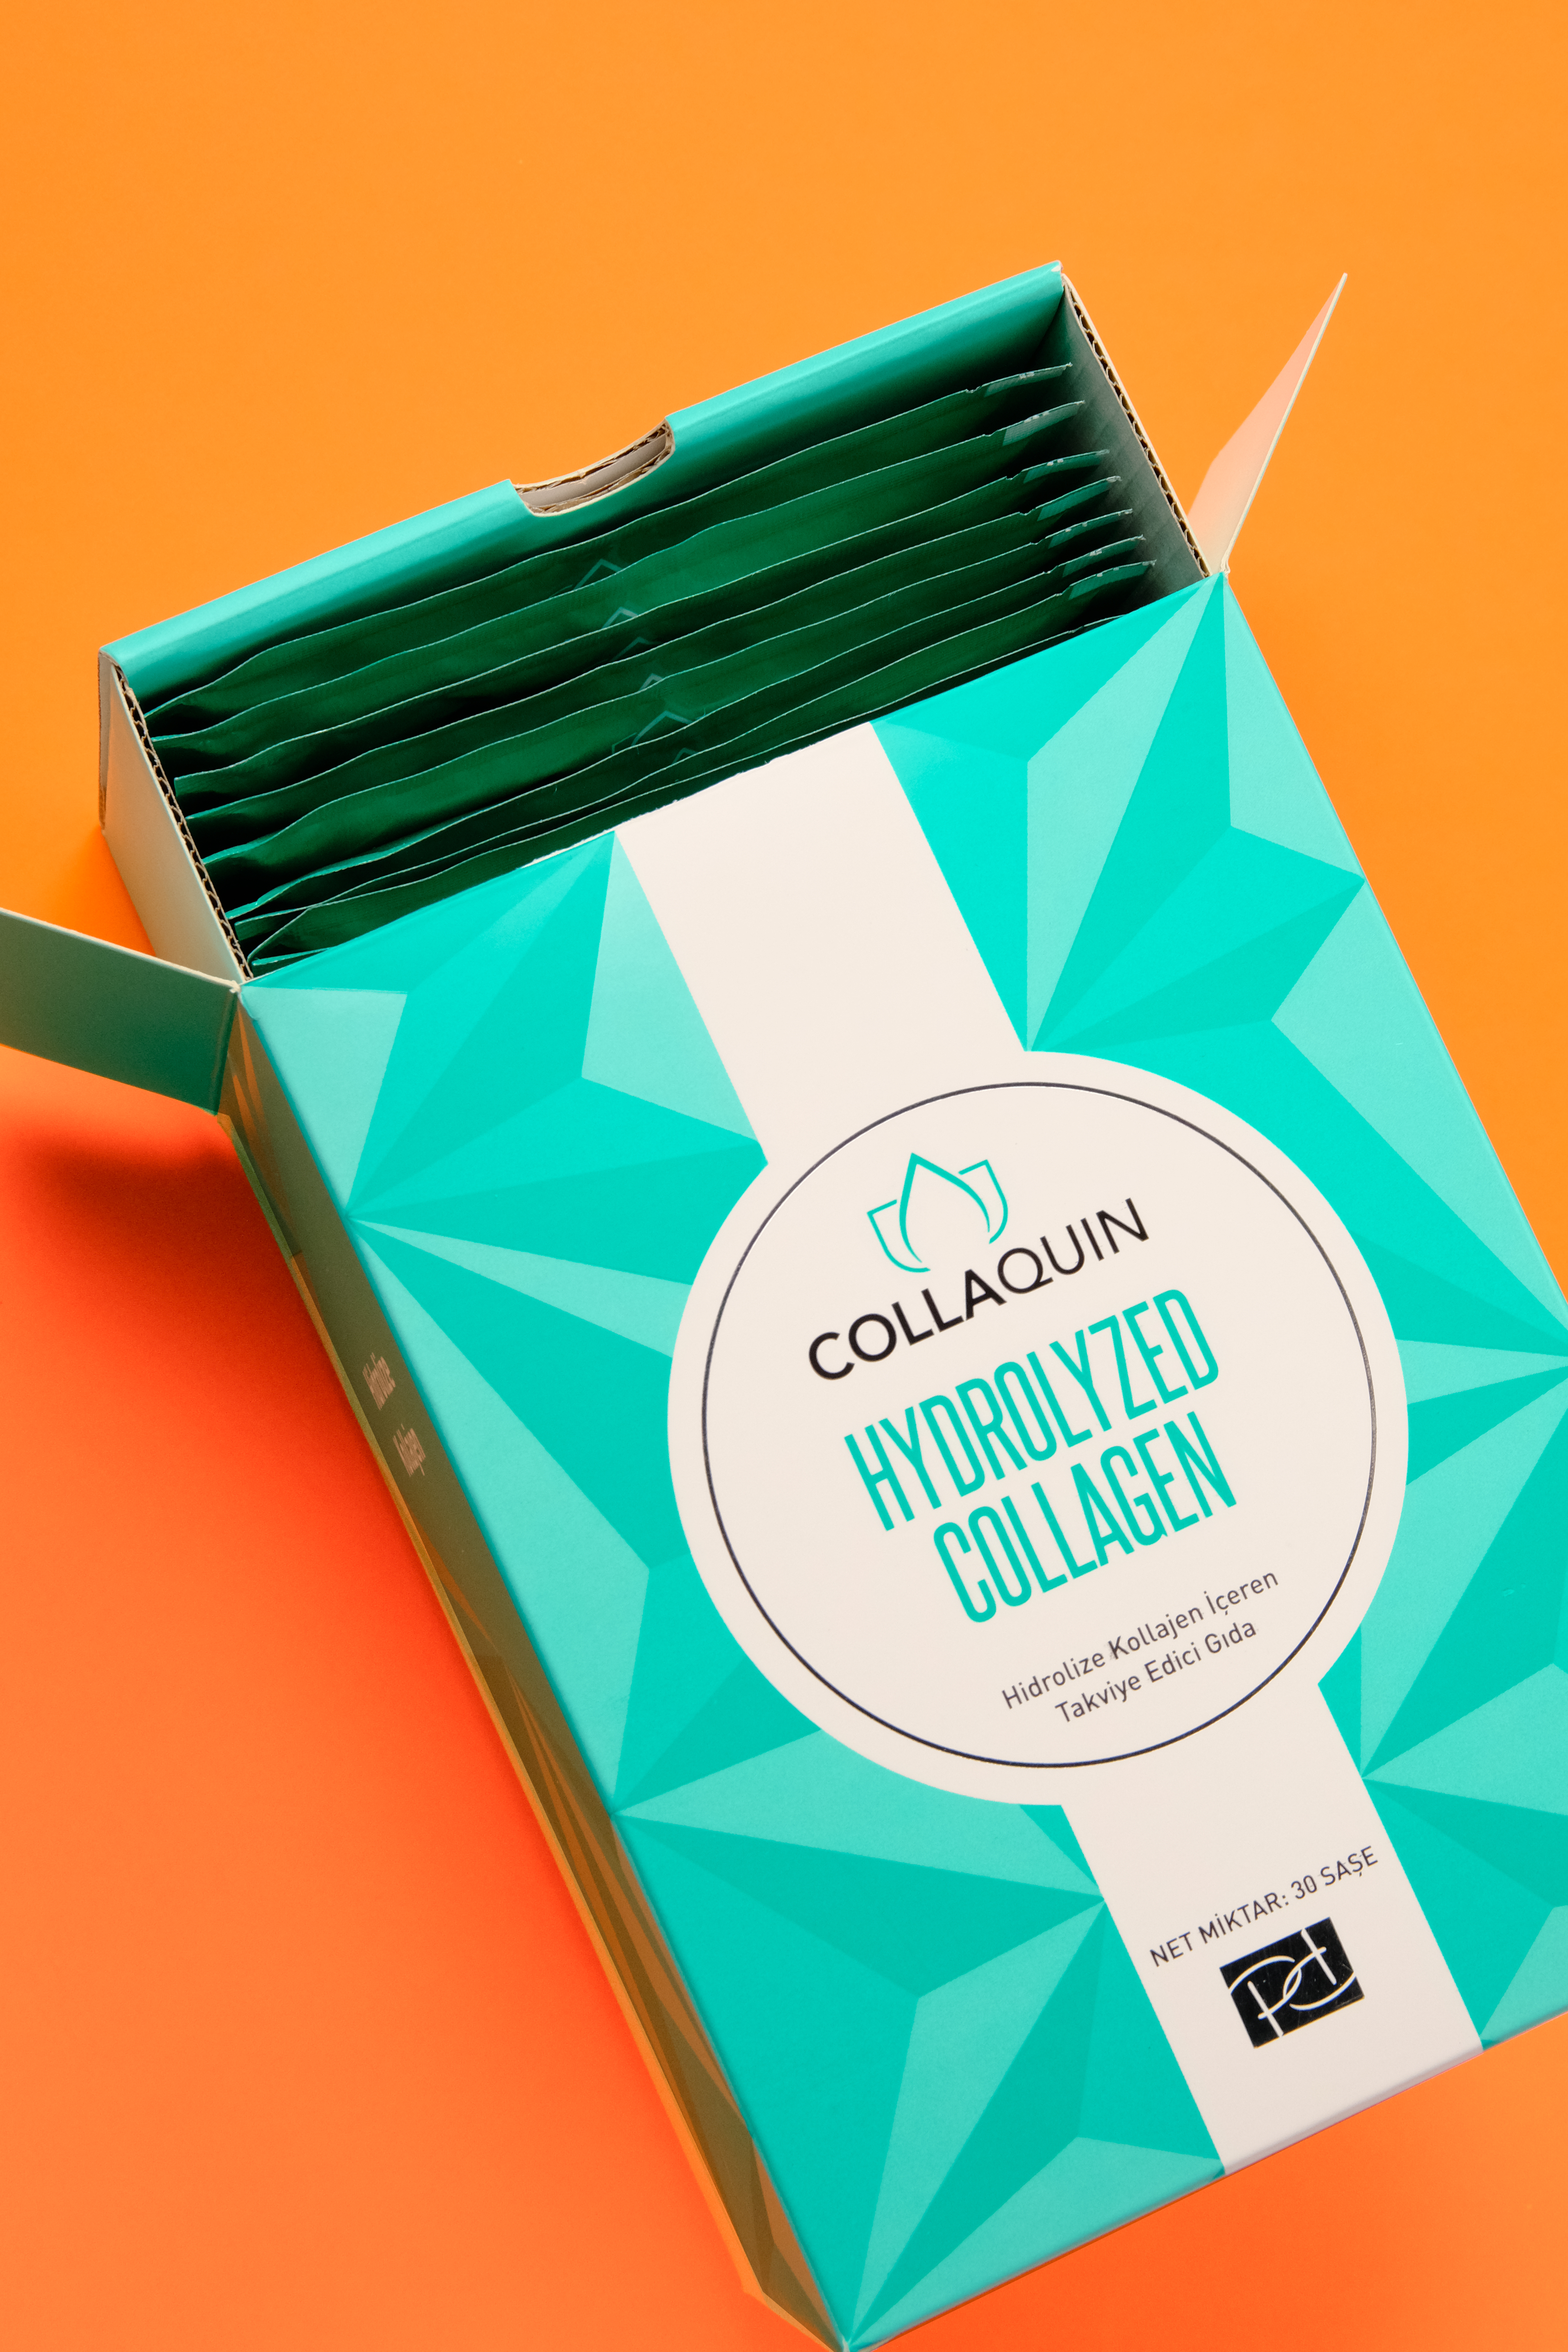 COLLAQUIN Hydrolyzed Collagen